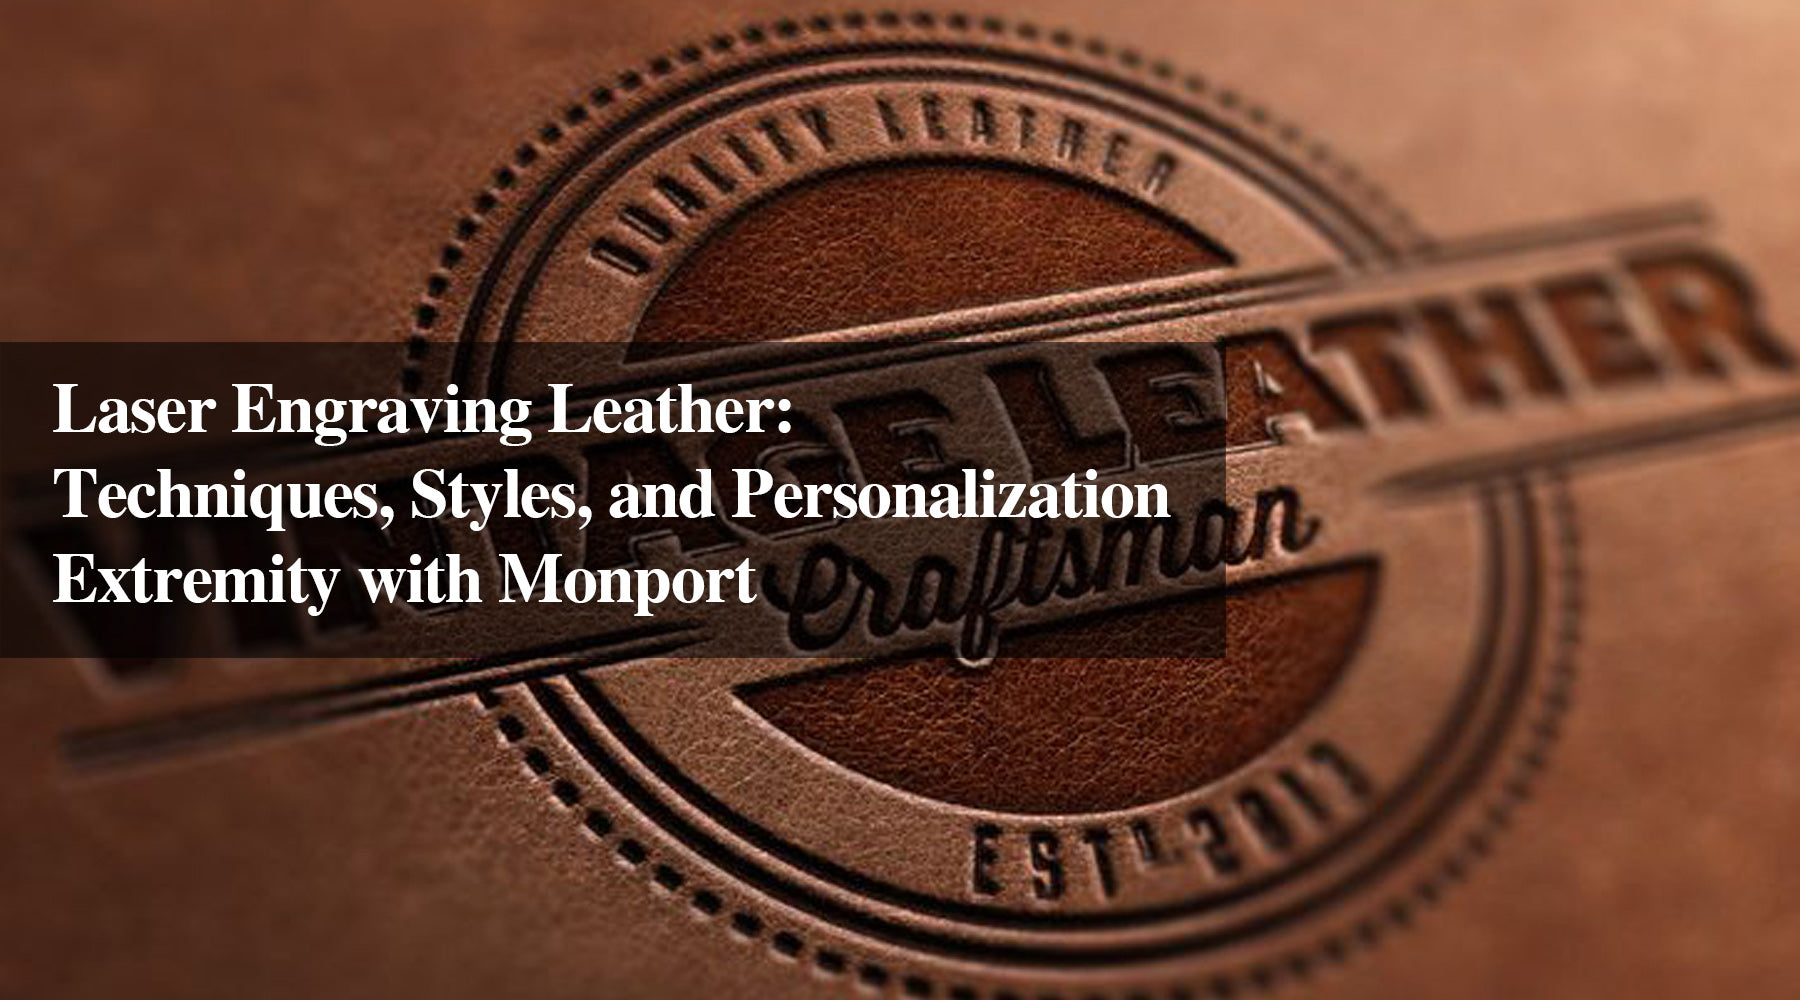 Laser Engraving Leather: Techniques, Styles, and Personalization Extremity with Monport